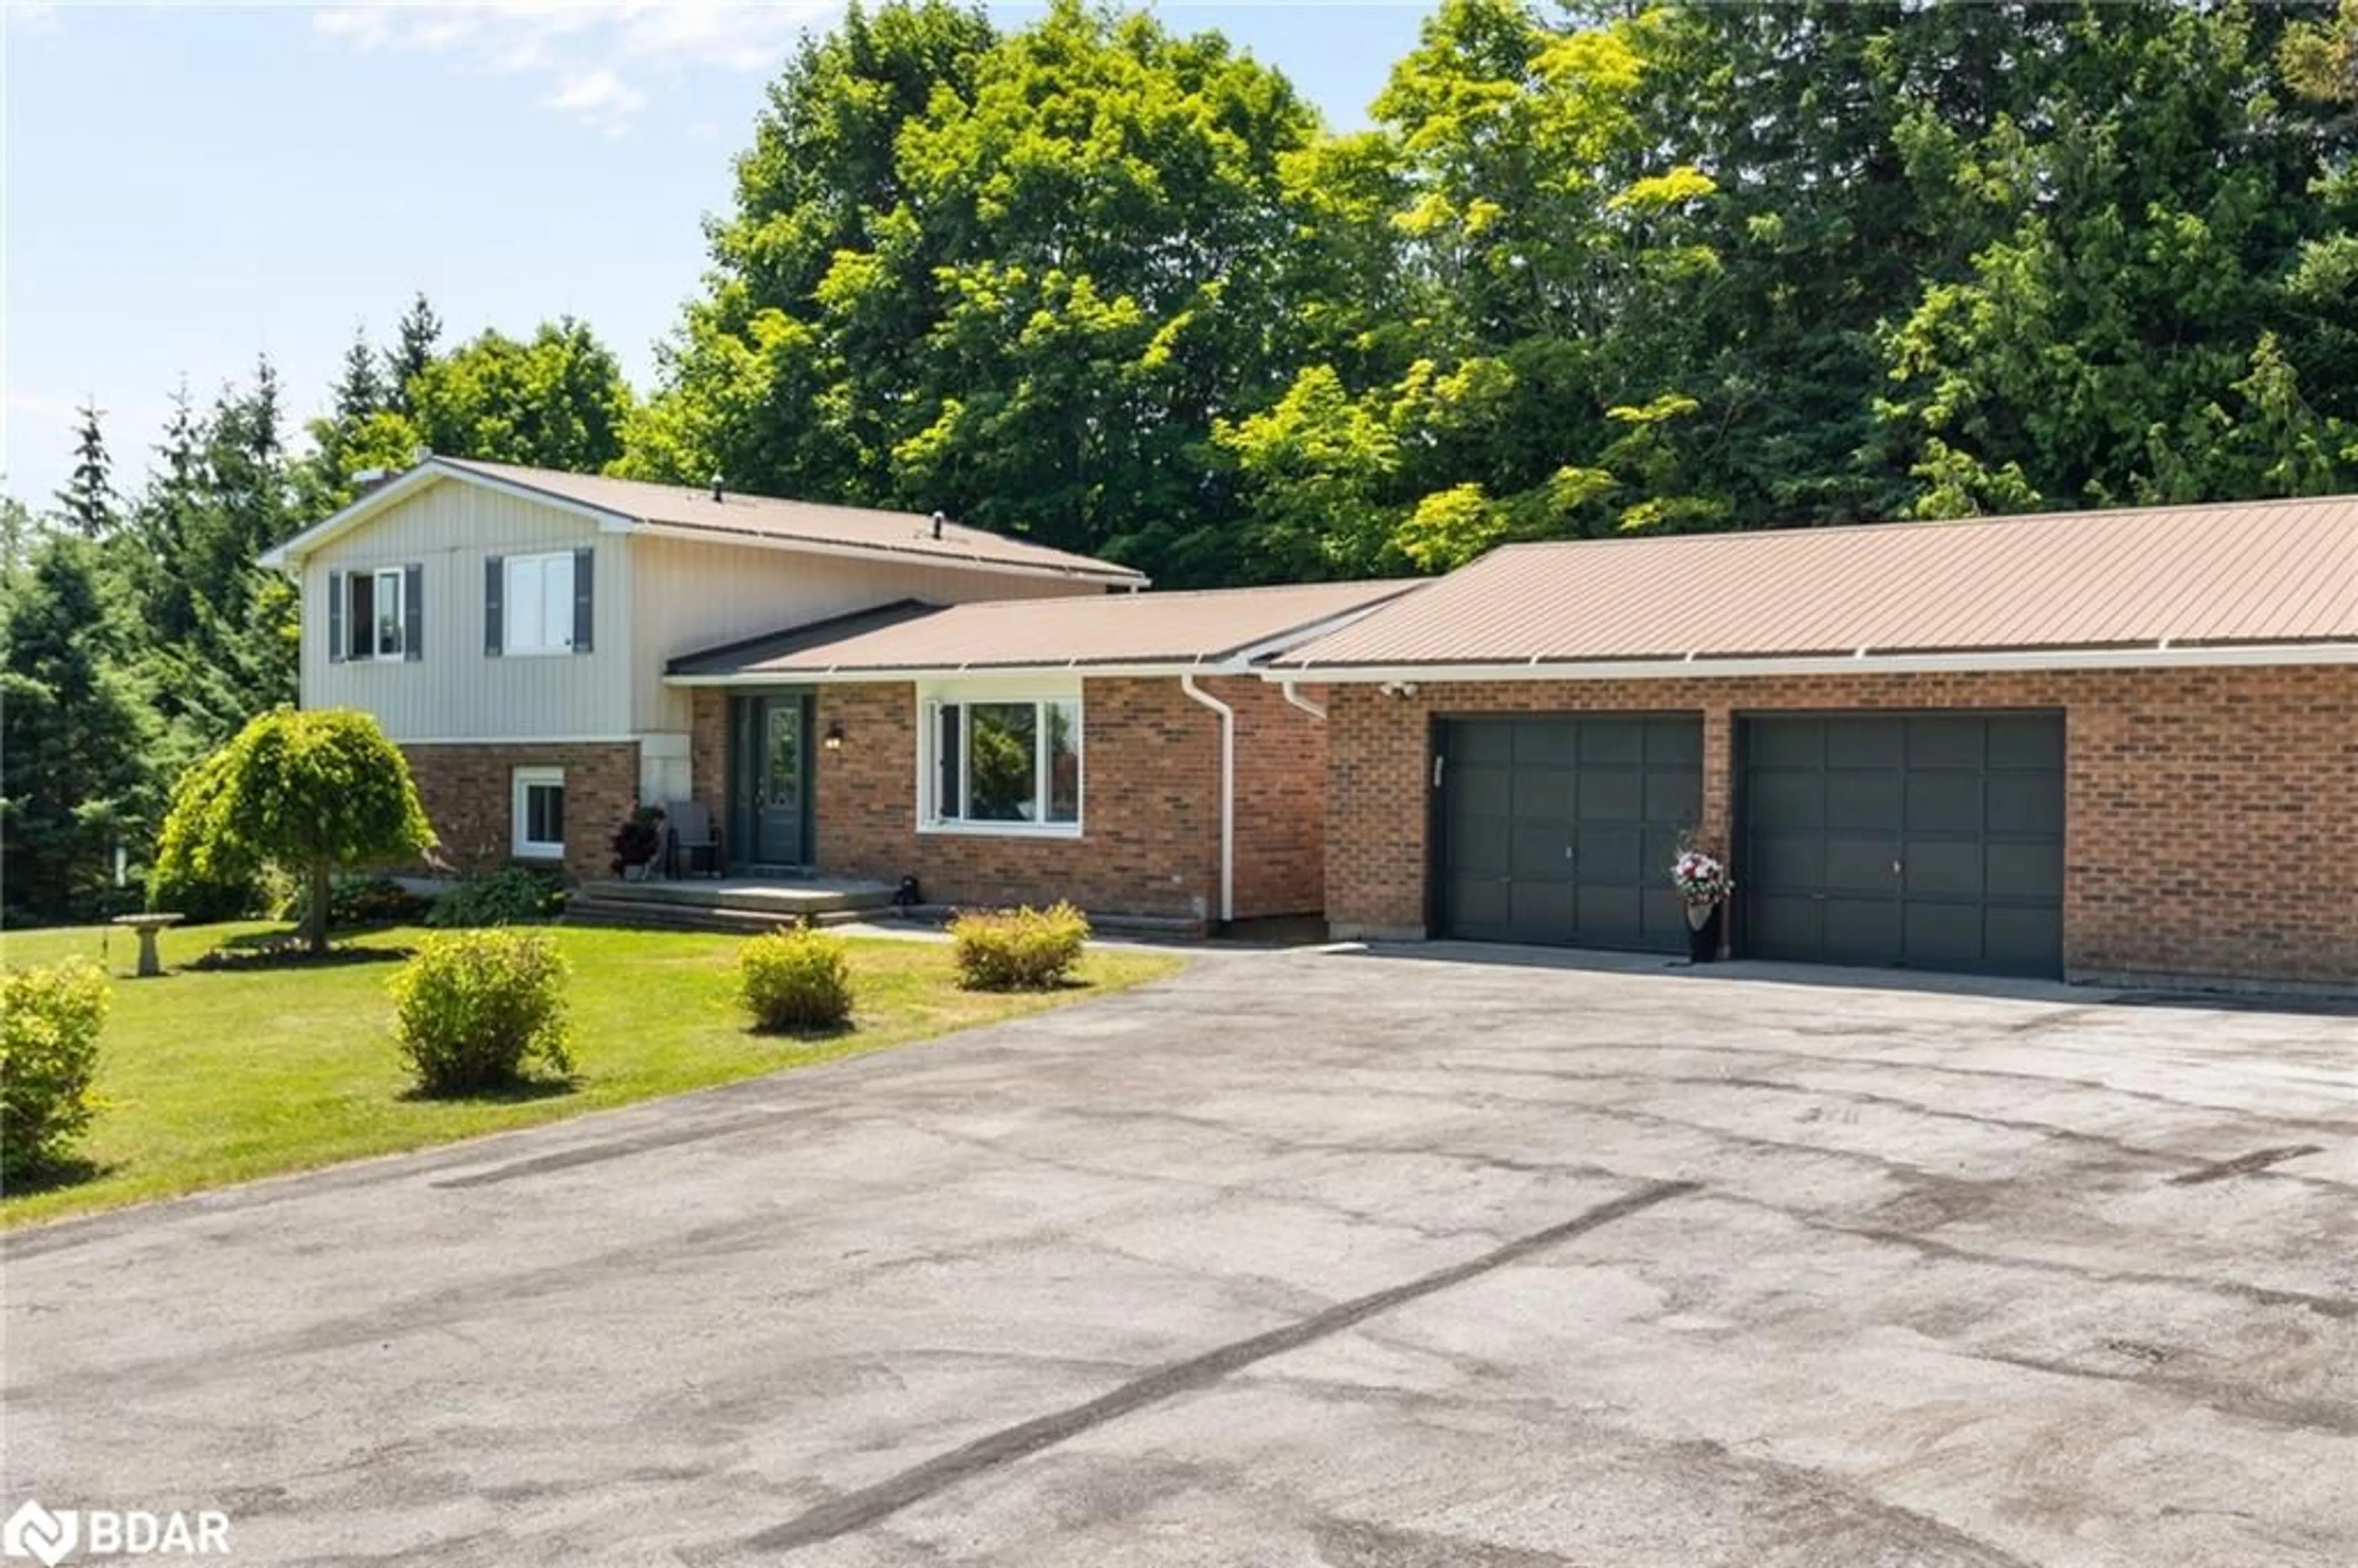 Home with brick exterior material for 4612 Line 5 N, Hillsdale Ontario L0L 1V0